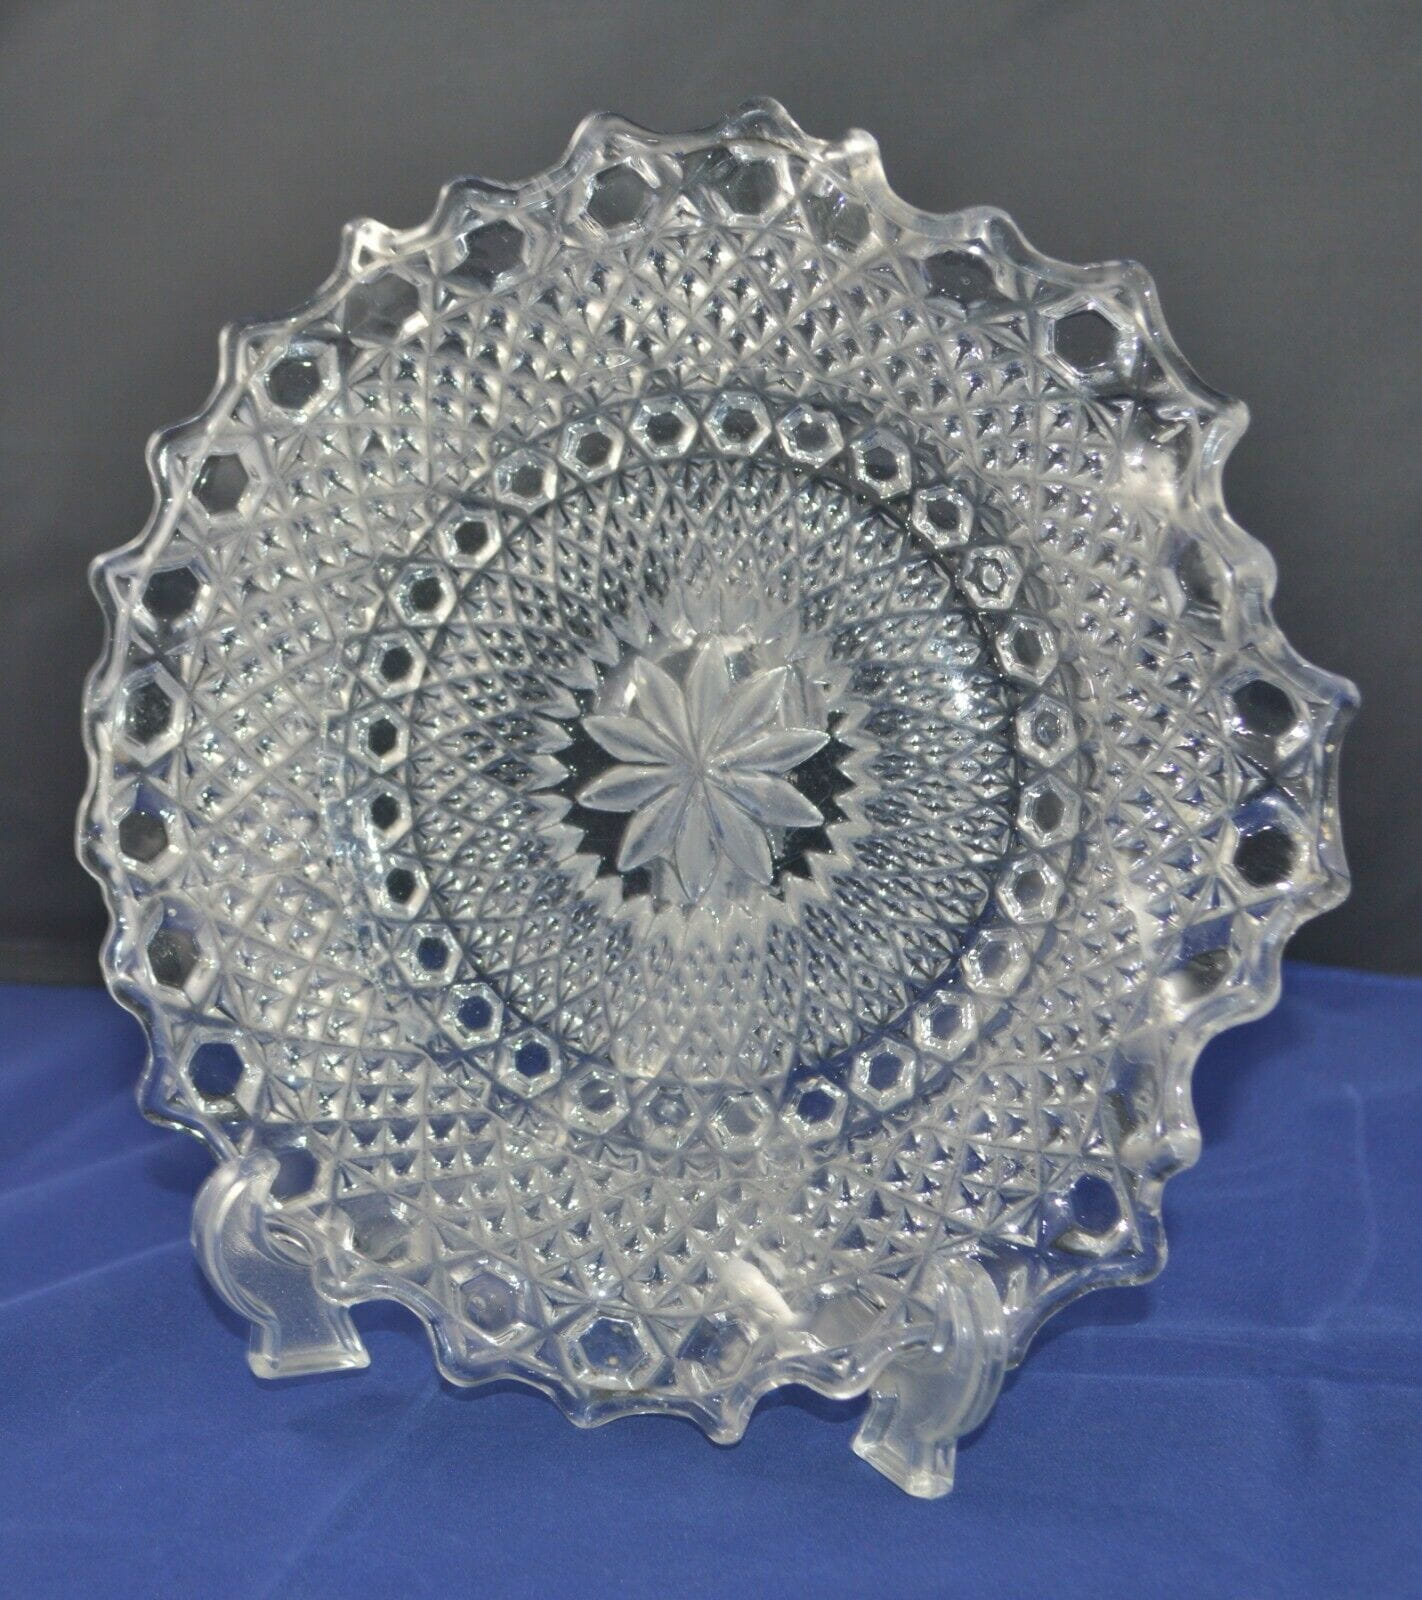 CUT GLASS DISH(PREVIOUSLY OWNED) GOOD CONDITION - TMD167207